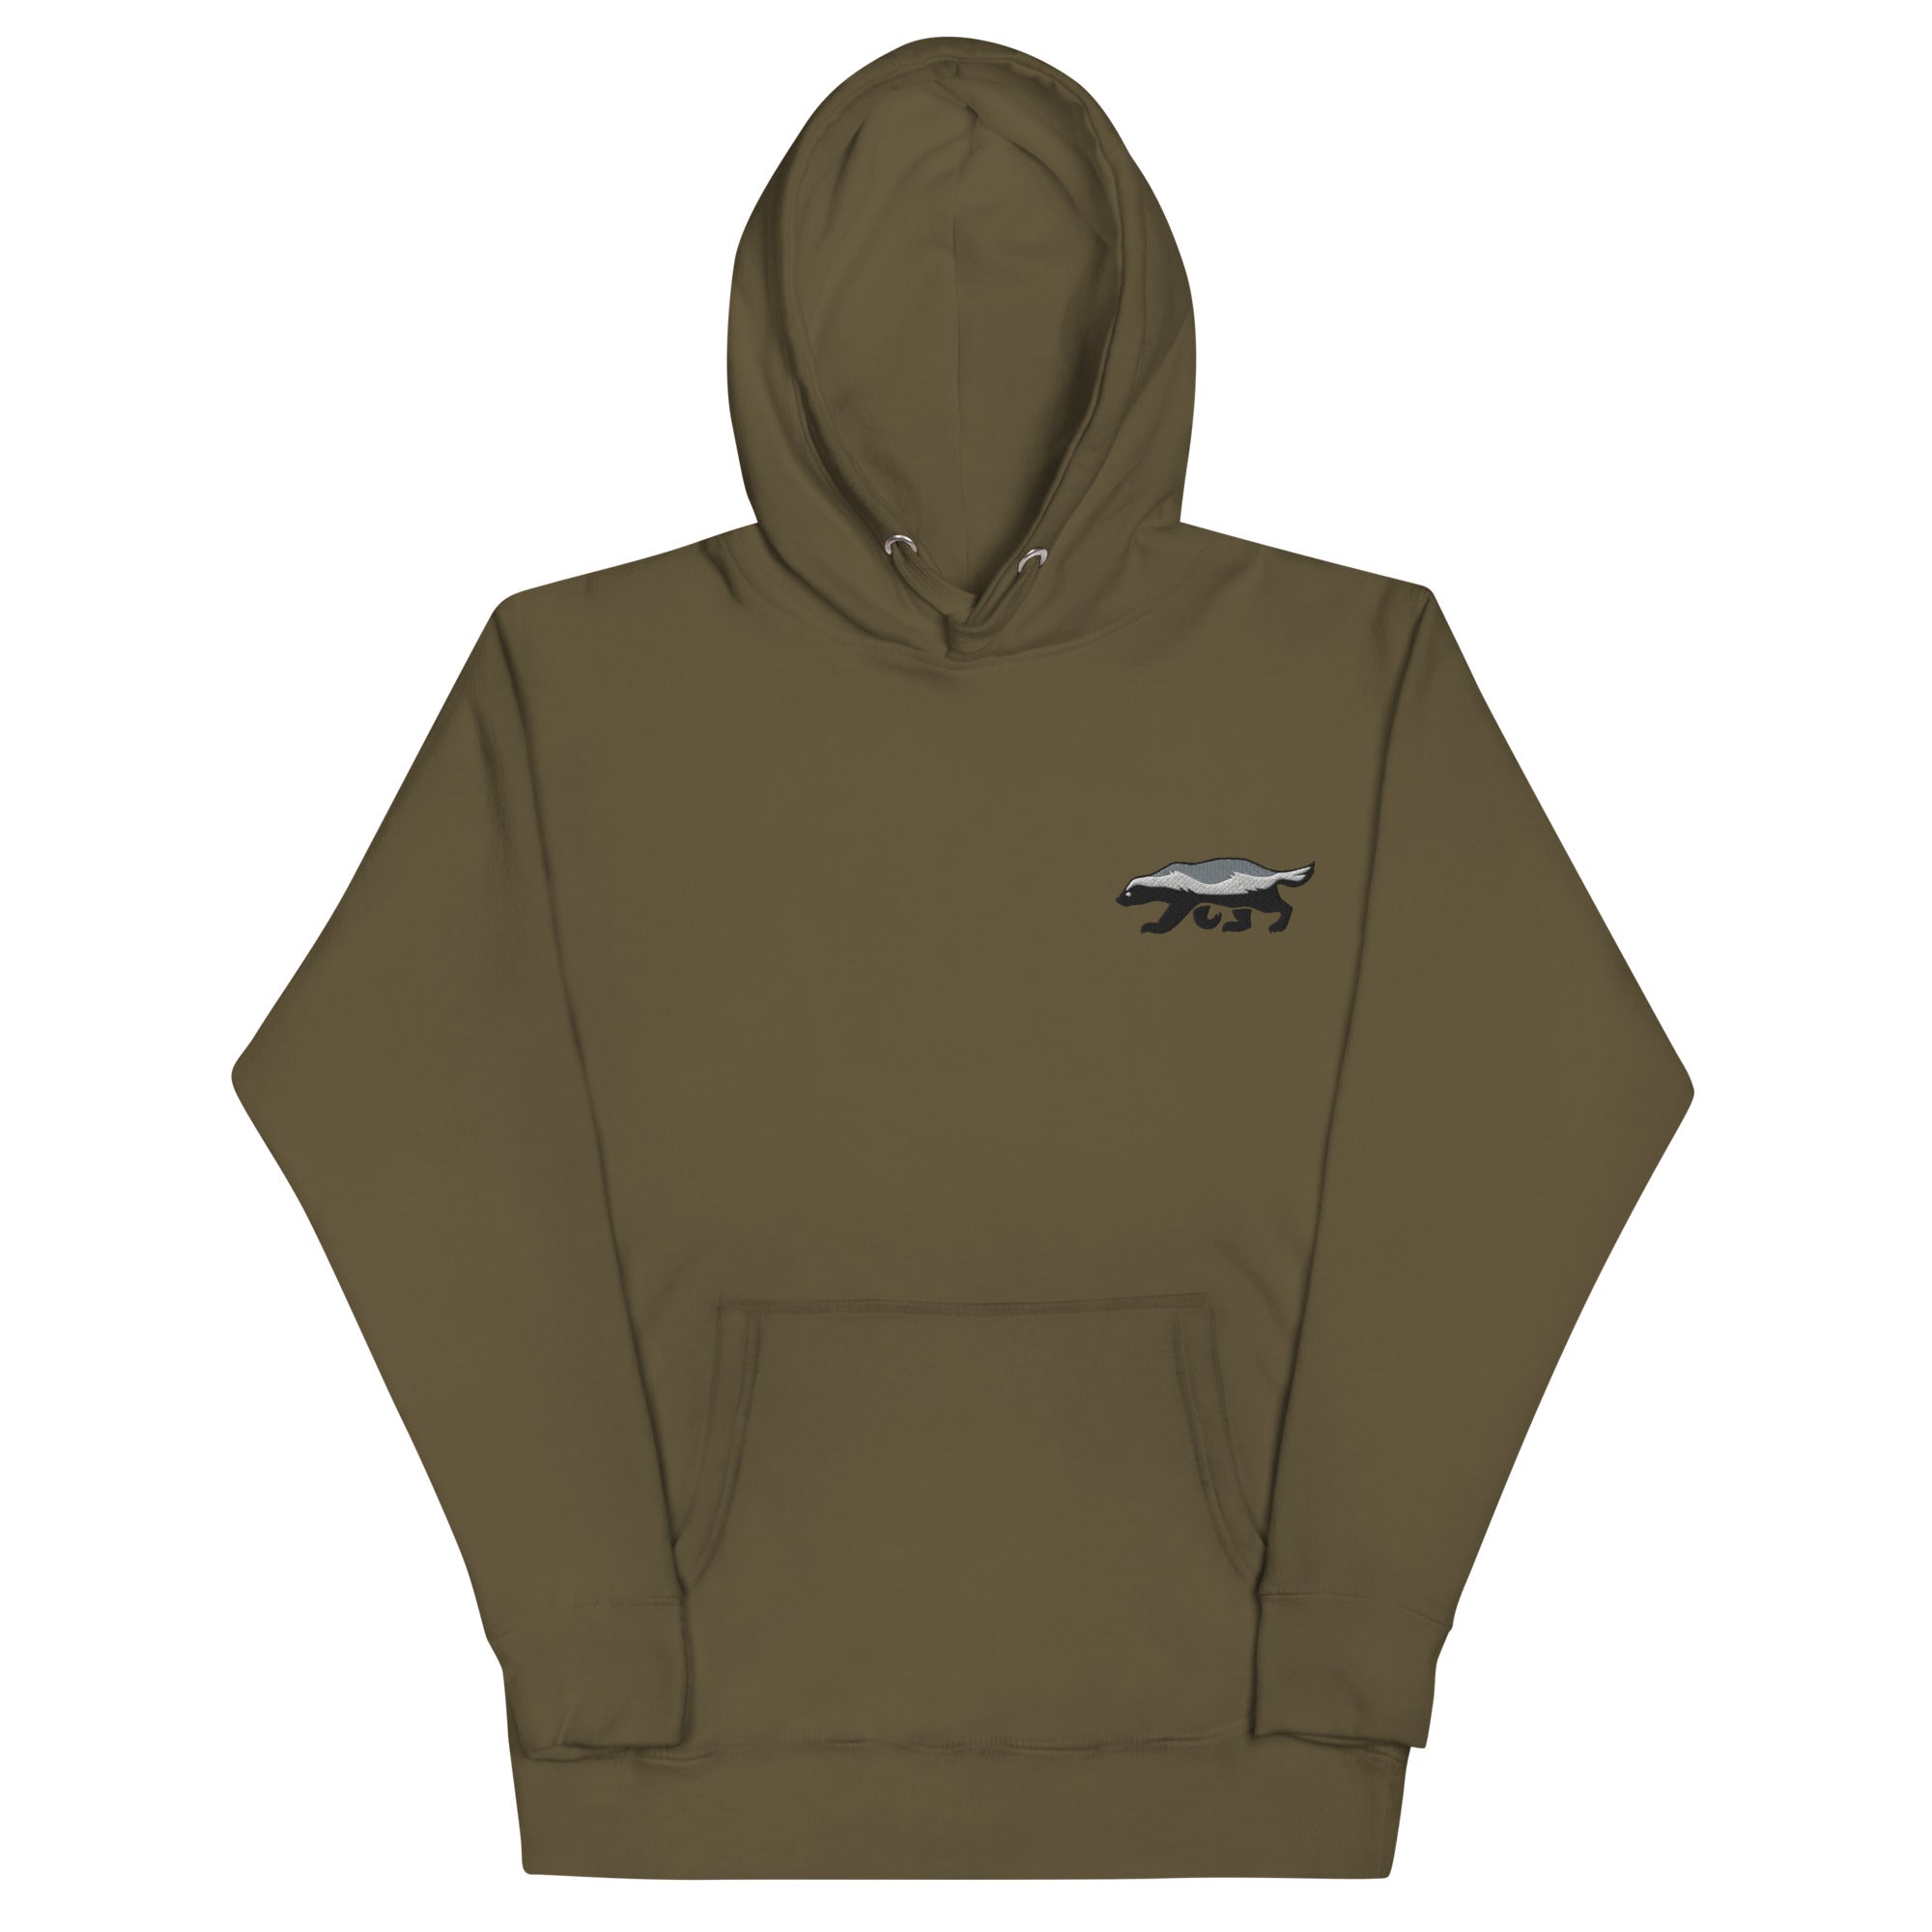 Honey Badger Embroidered Hoodie